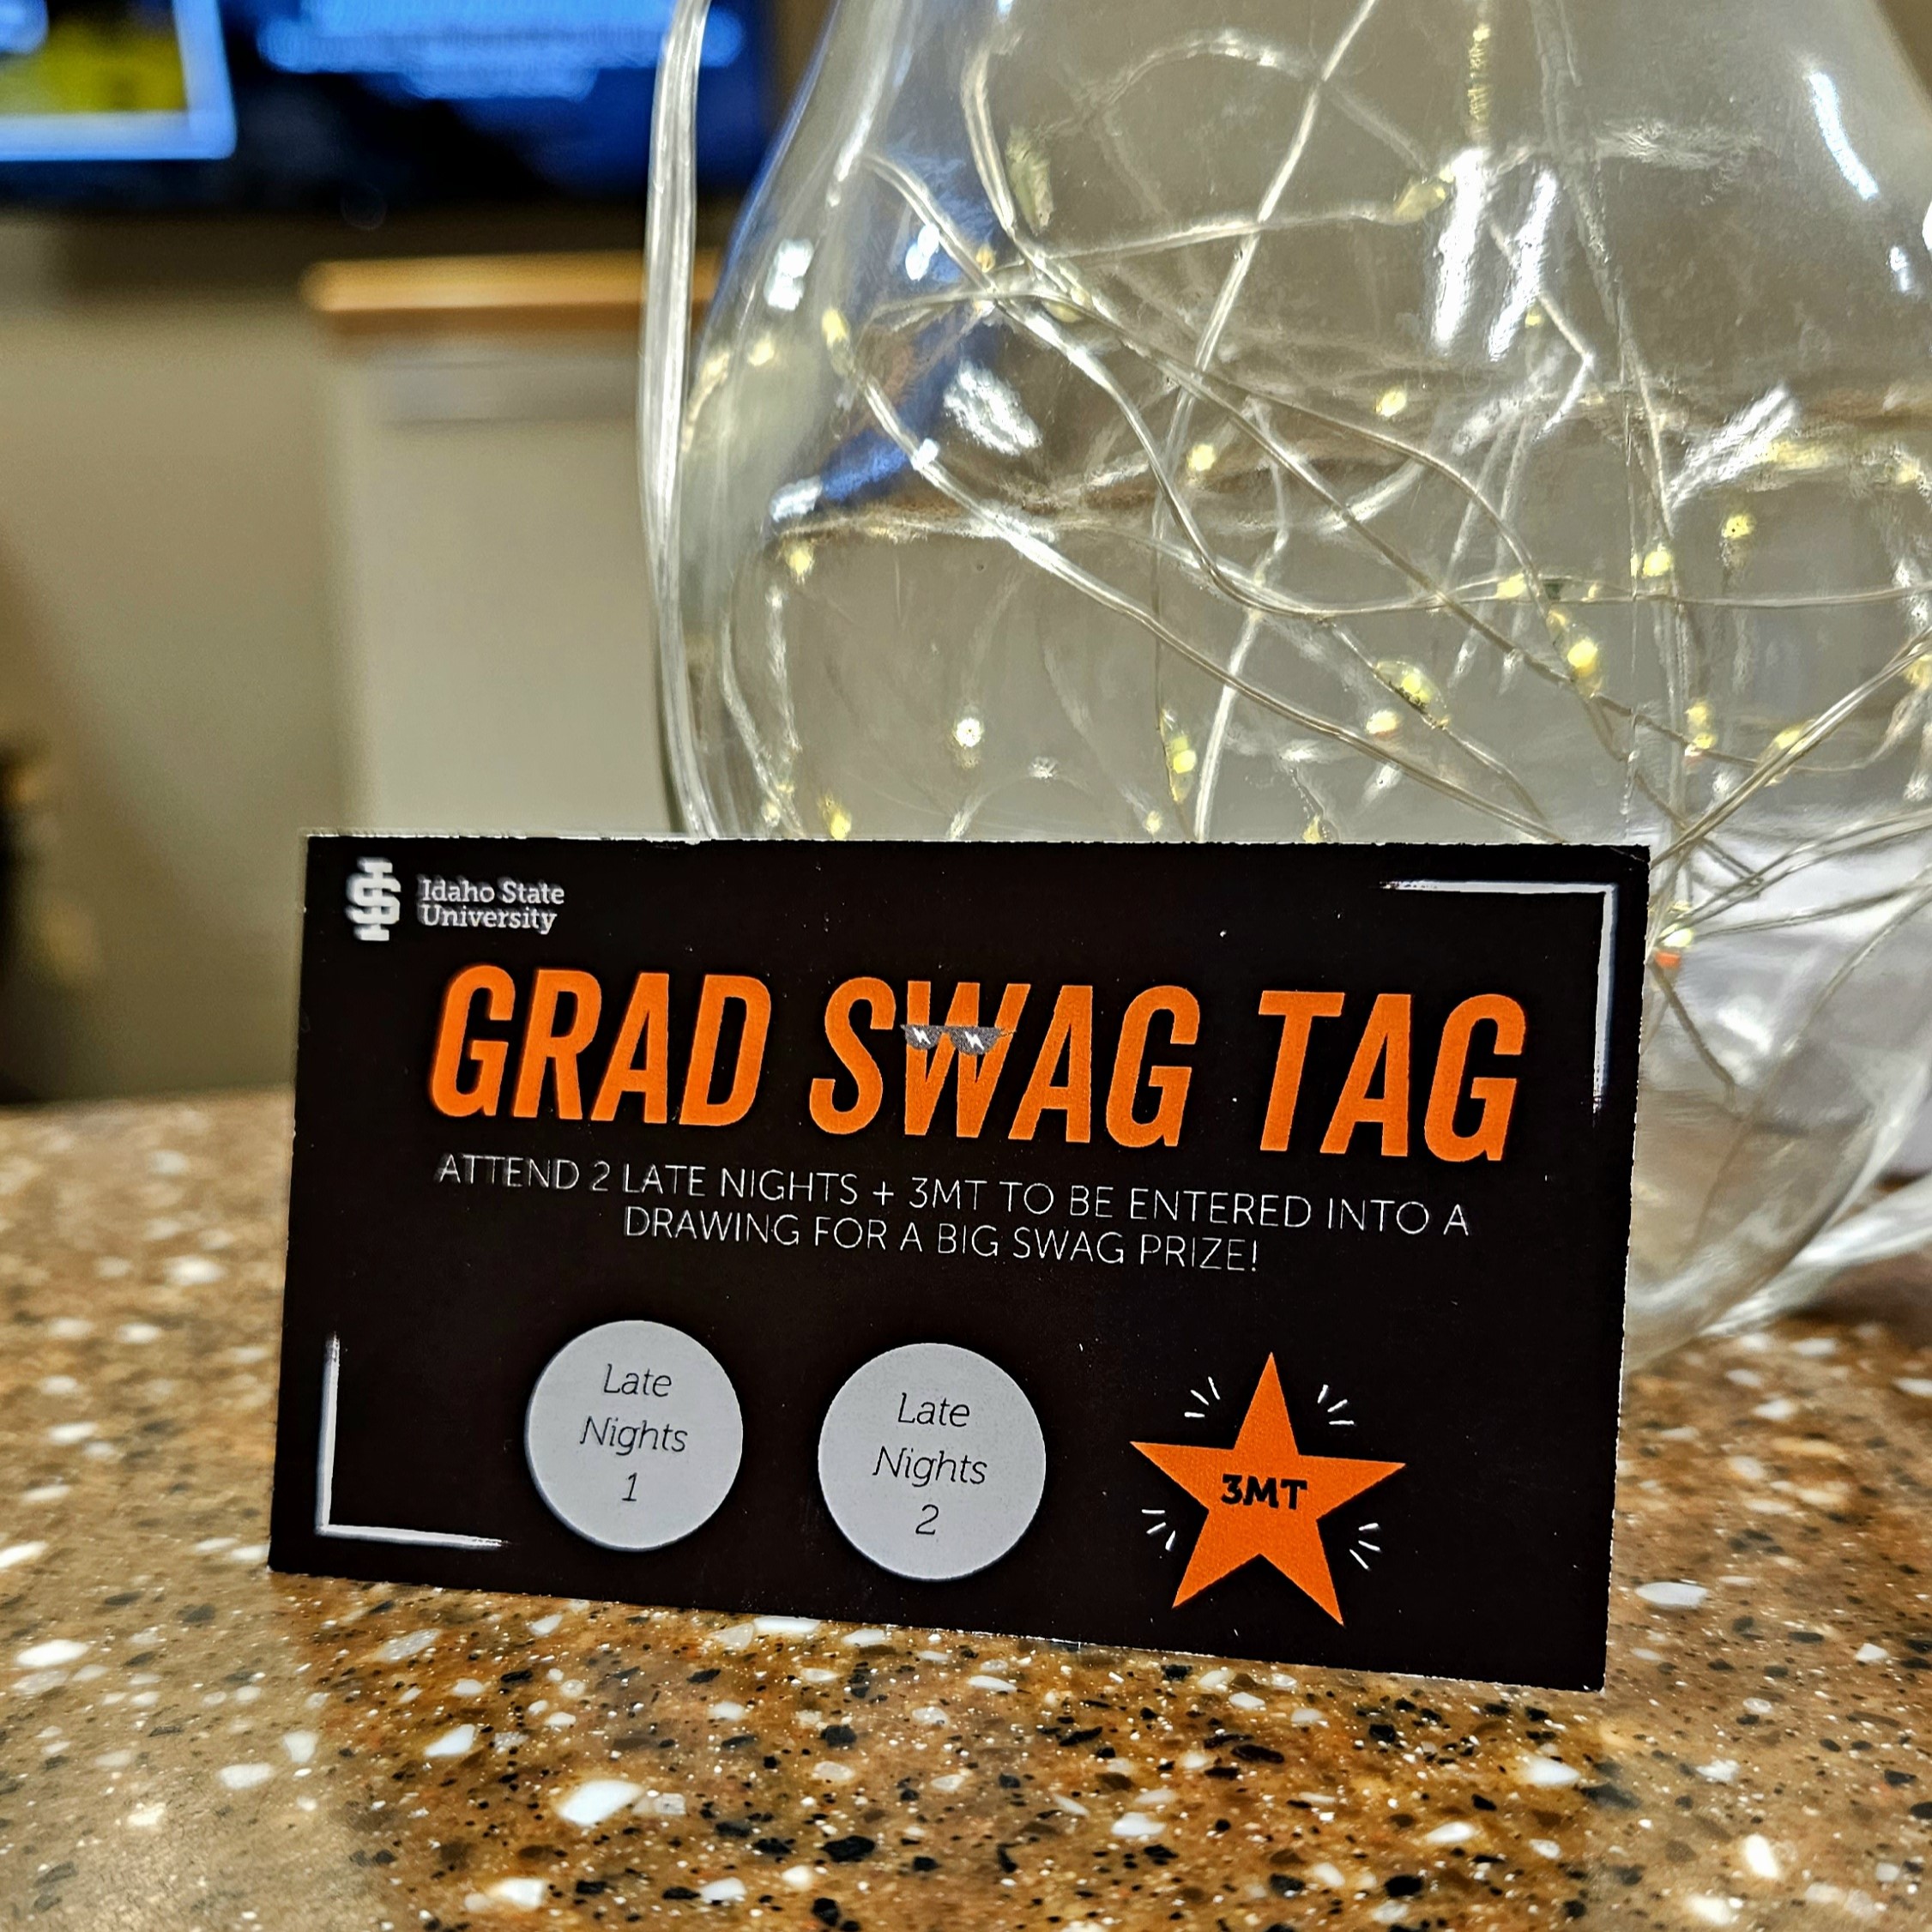 A picture of the Graduate School event punch card